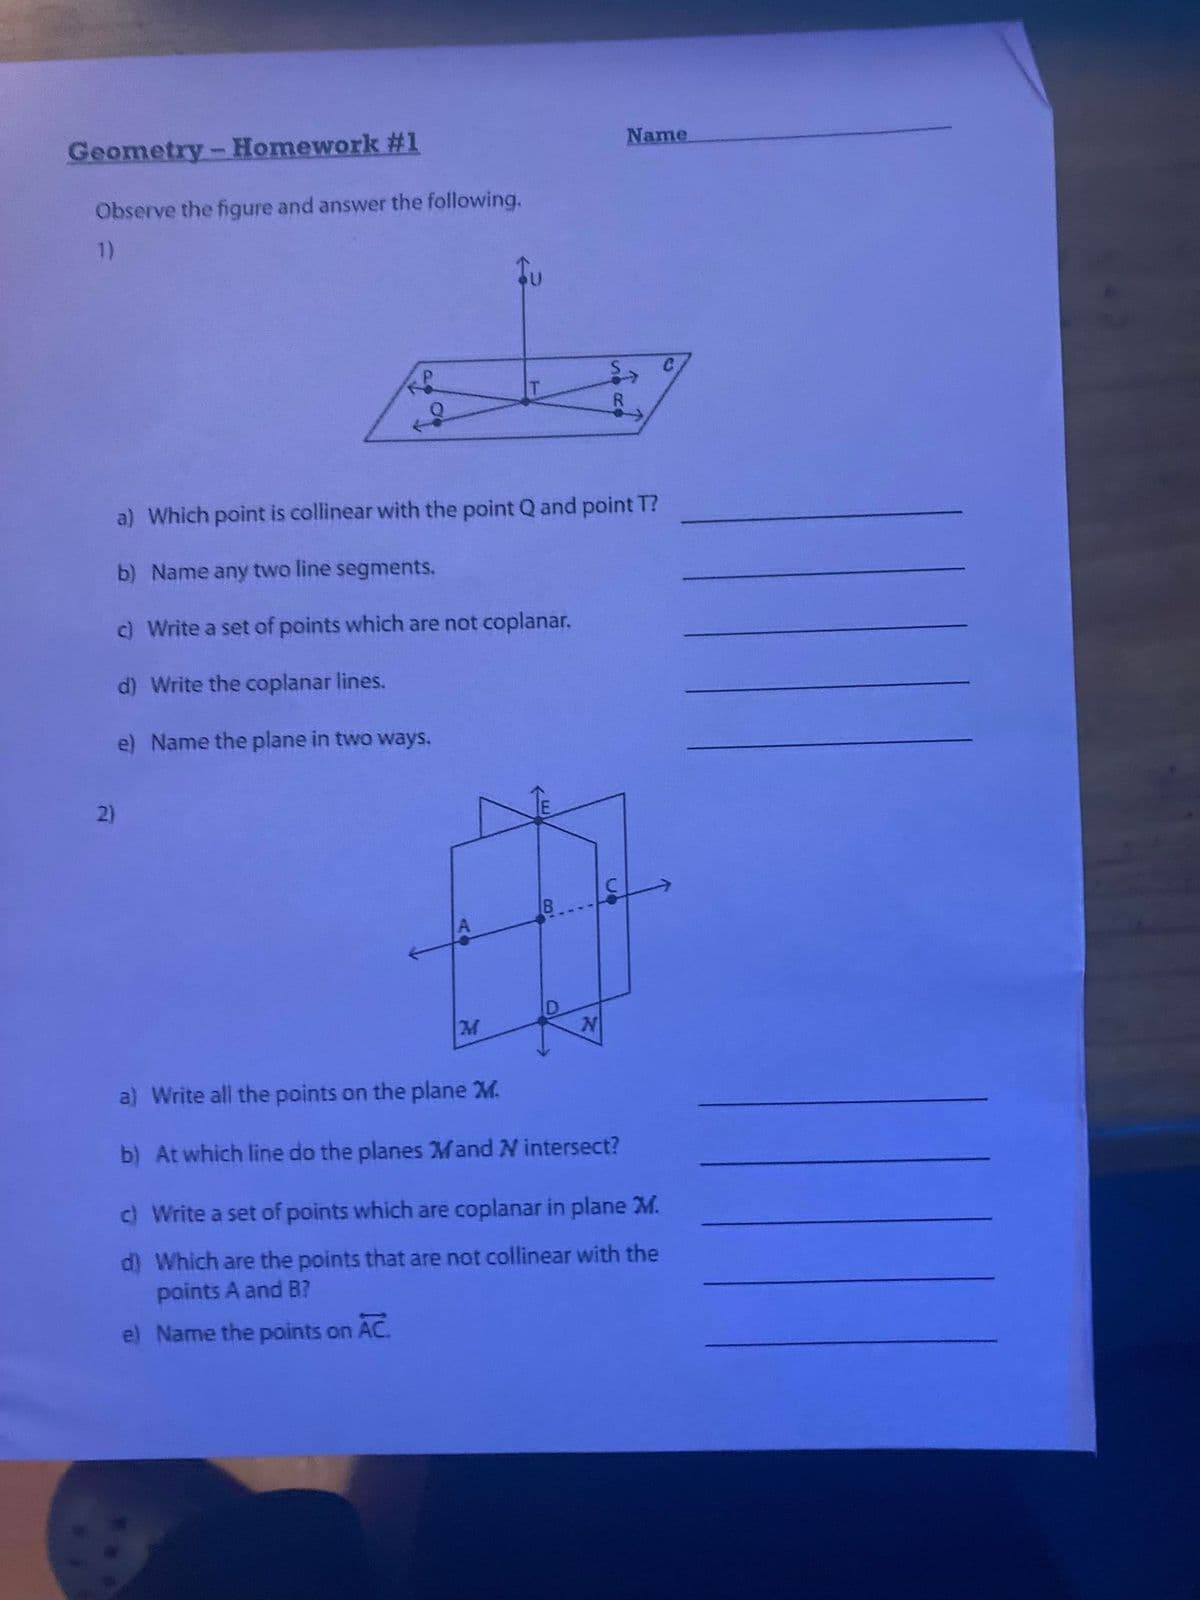 Name
Geometry - Homework #1
Observe the figure and answer the following.
1)
P
R
a) Which point is collinear with the point Q and point T?
b) Name any two line segments.
c) Write a set of points which are not coplanar.
d) Write the coplanar lines.
e) Name the plane in two ways.
2)
M
N
a) Write all the points on the plane M.
b) At which line do the planes Mand N intersect?
c) Write a set of points which are coplanar in plane M.
d) Which are the points that are not collinear with the
points A and B?
e) Name the points on AC.